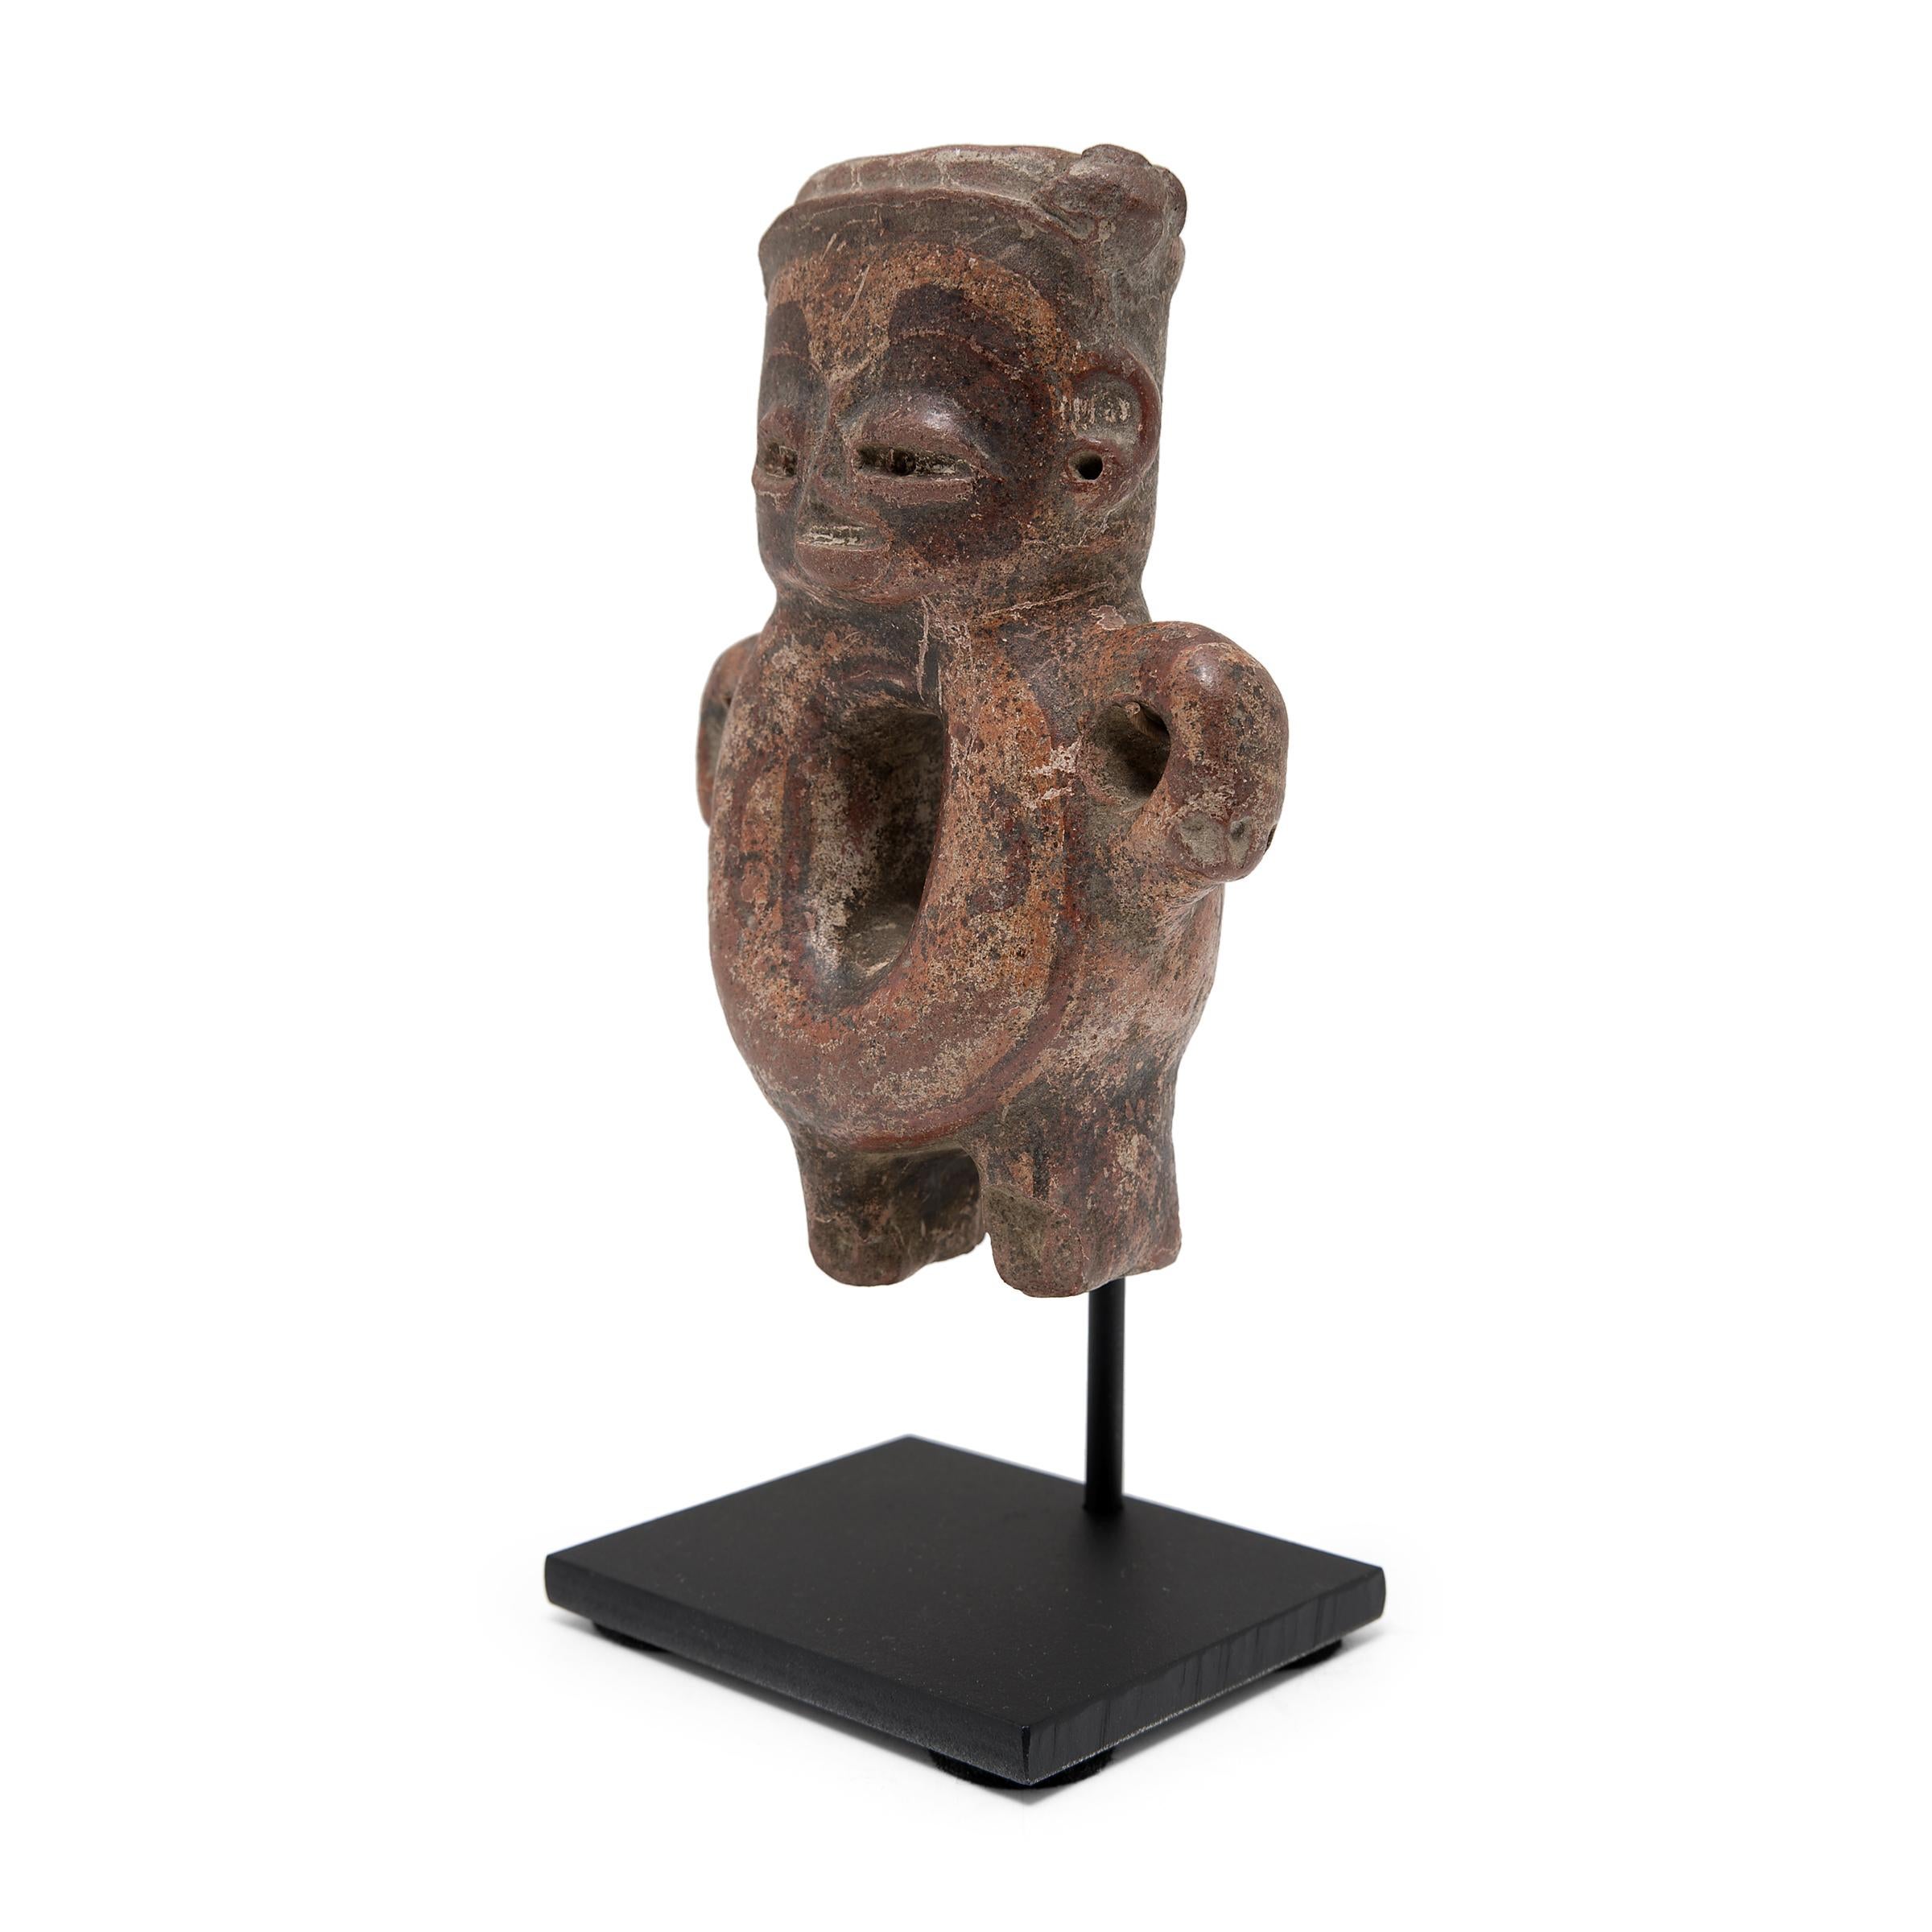 This standing effigy figure was crafted in 300 BC from the ancient Chupicuaro region of Mexico and was likely used as a ritual or burial offering. The ceramic works of the Chupicuaro people are often distinguished by their slanted, coffee-bean